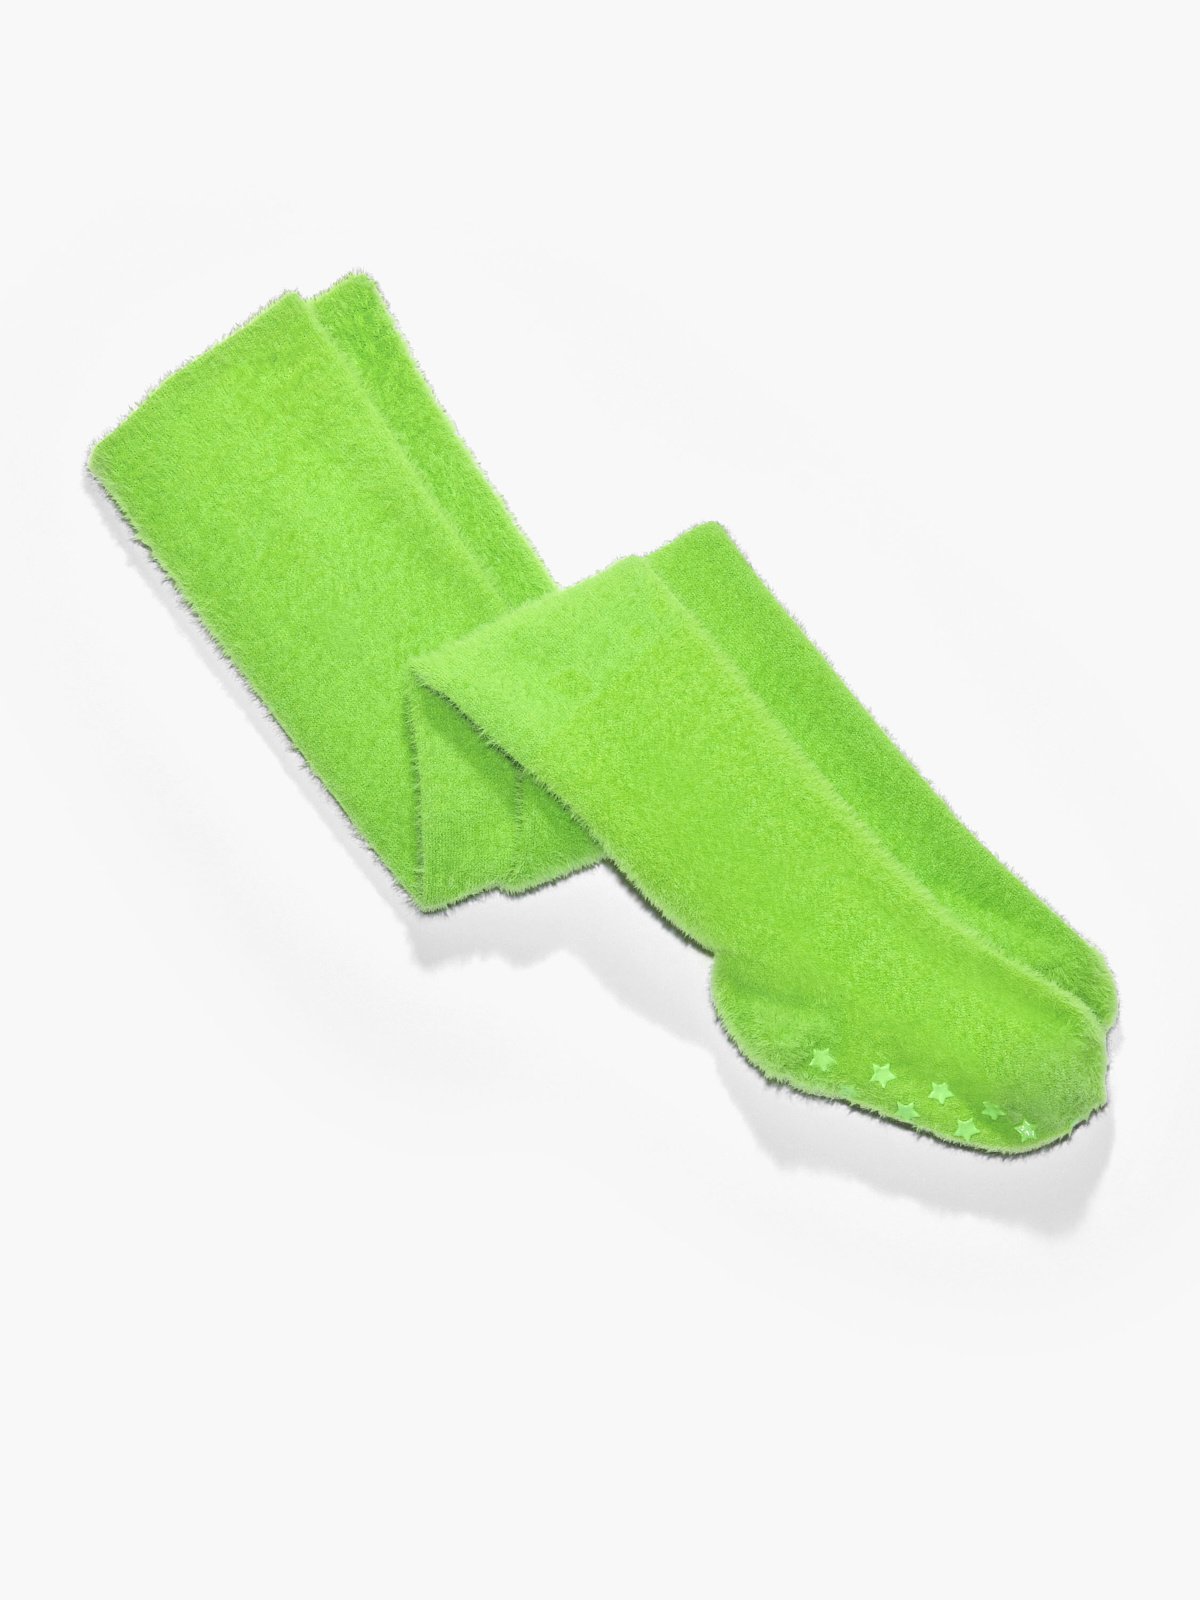 Fluff It Up Slipper Stockings in Green | SAVAGE X FENTY France